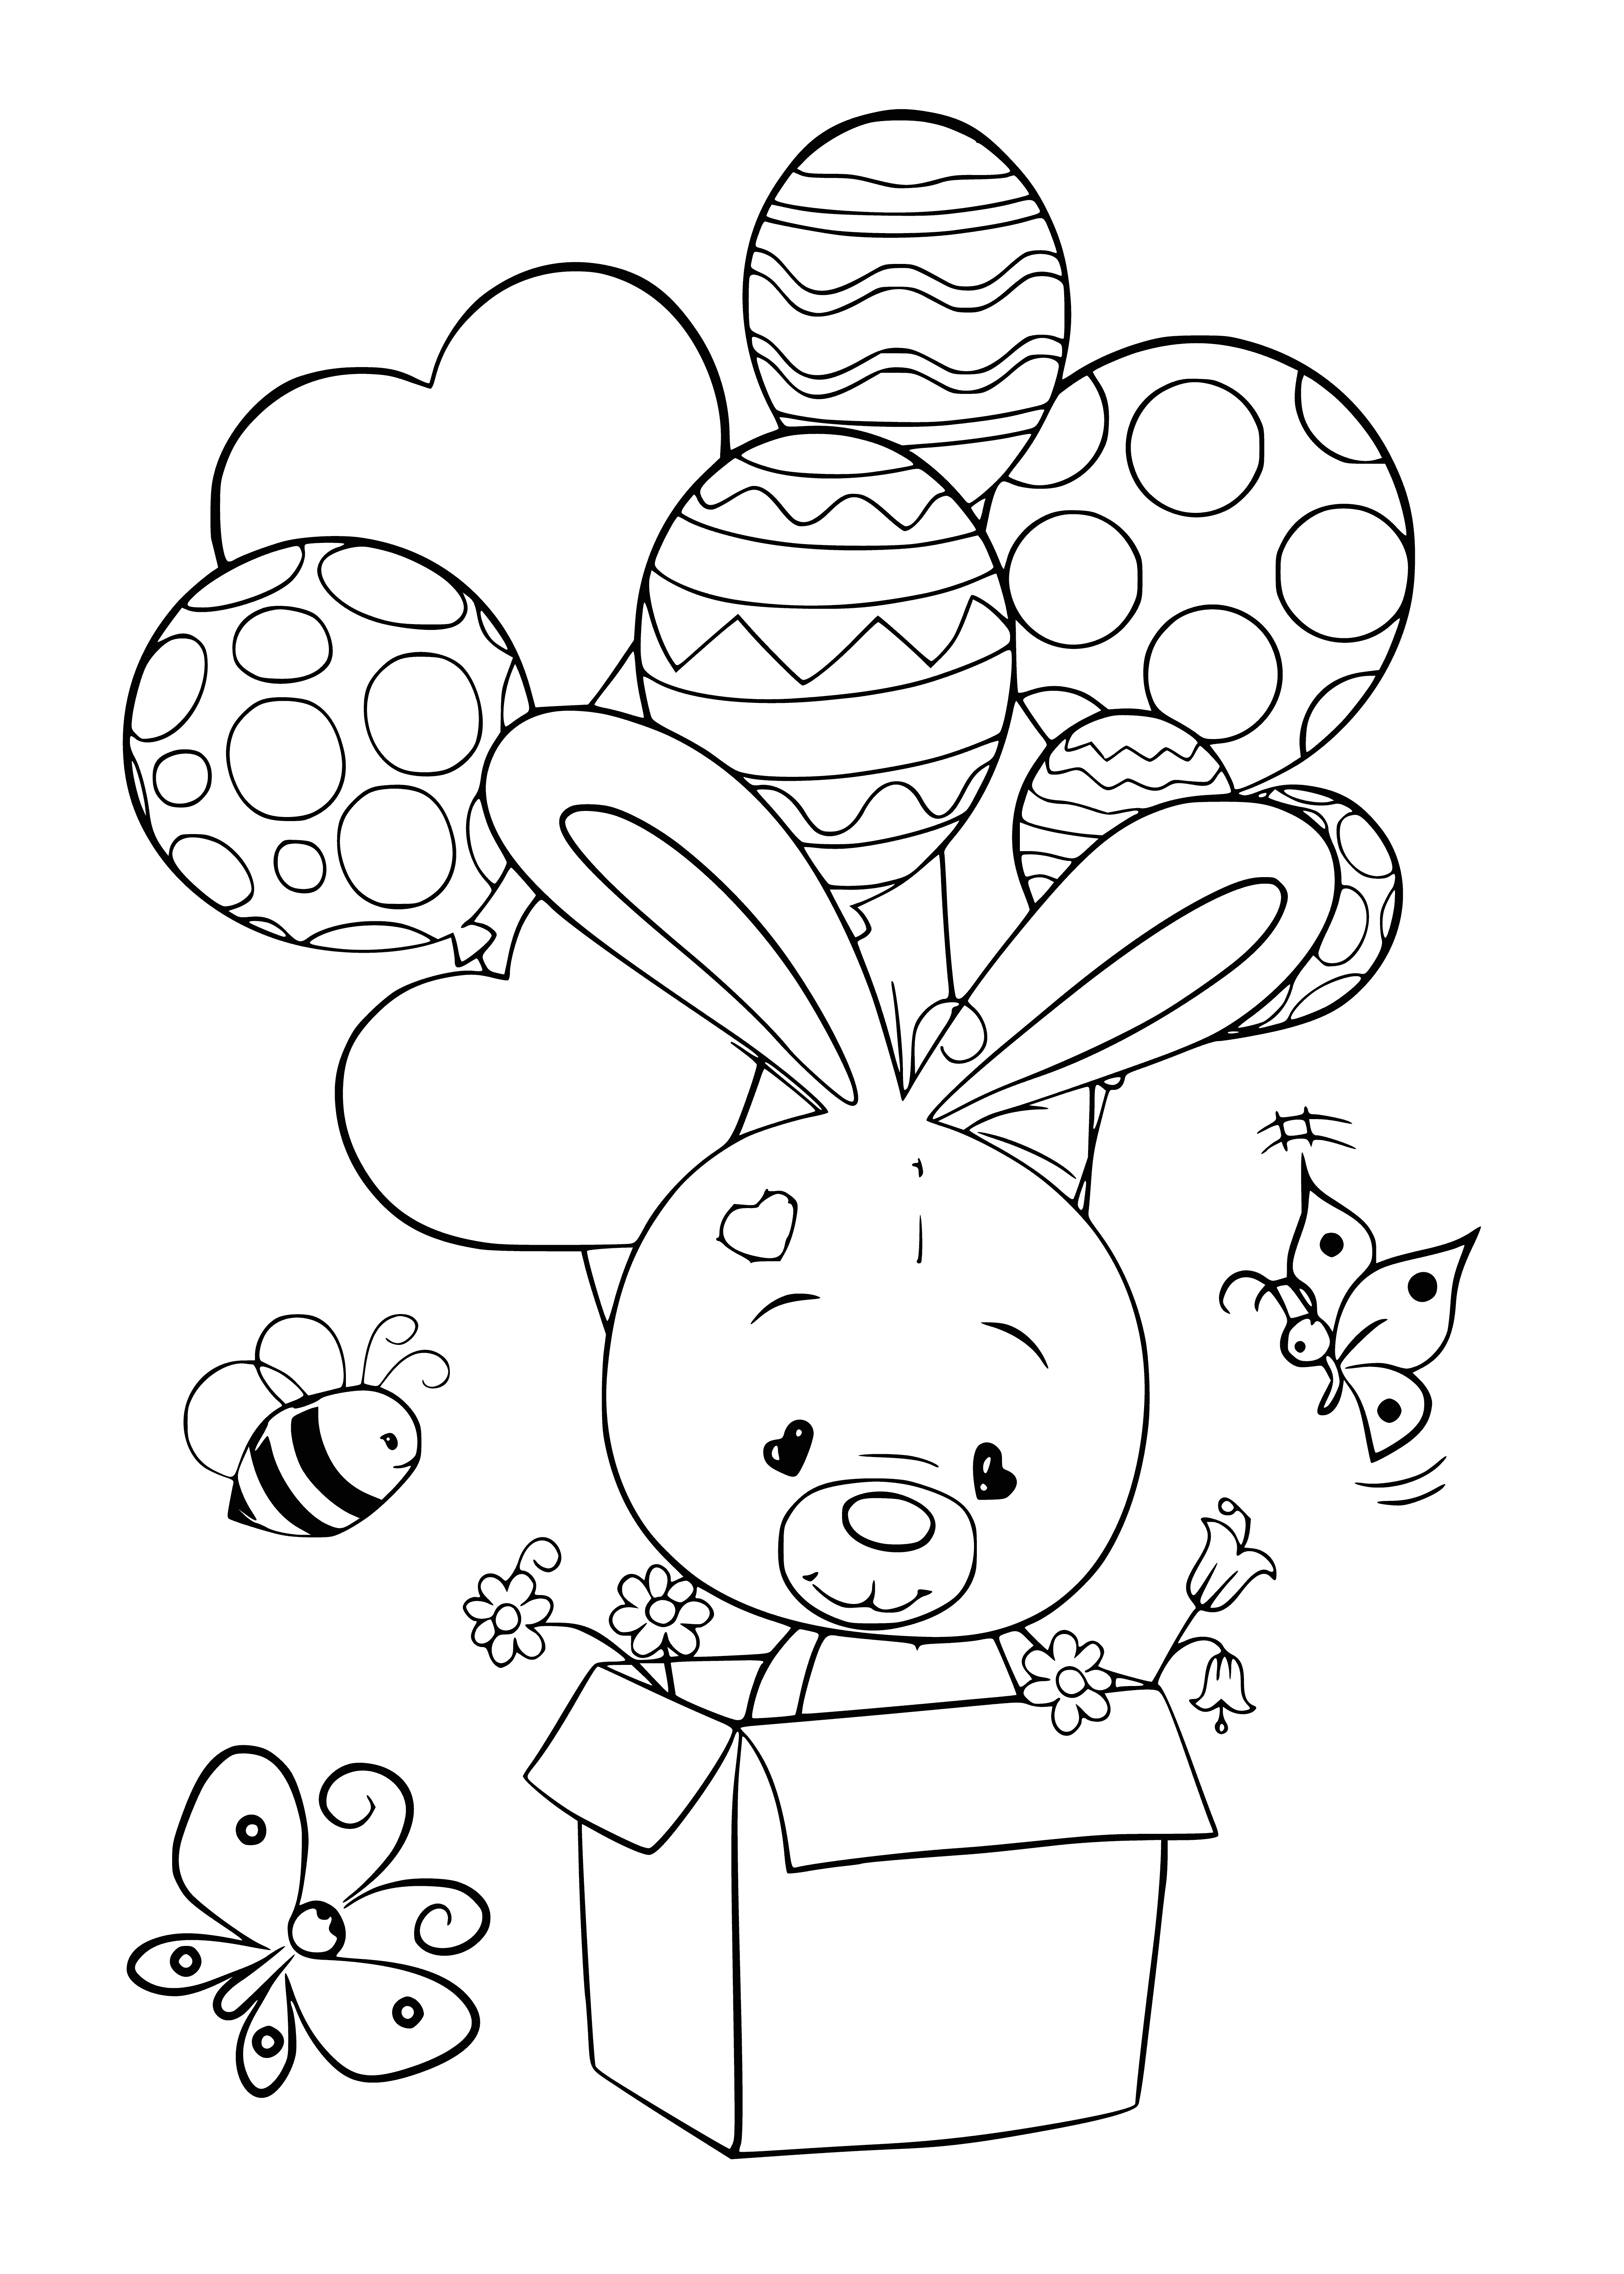 coloring page: Adorable bunny smiles, eyes closed, holding two red balloons. Big ears & whiskers make this coloring page special. #colorful #bunny